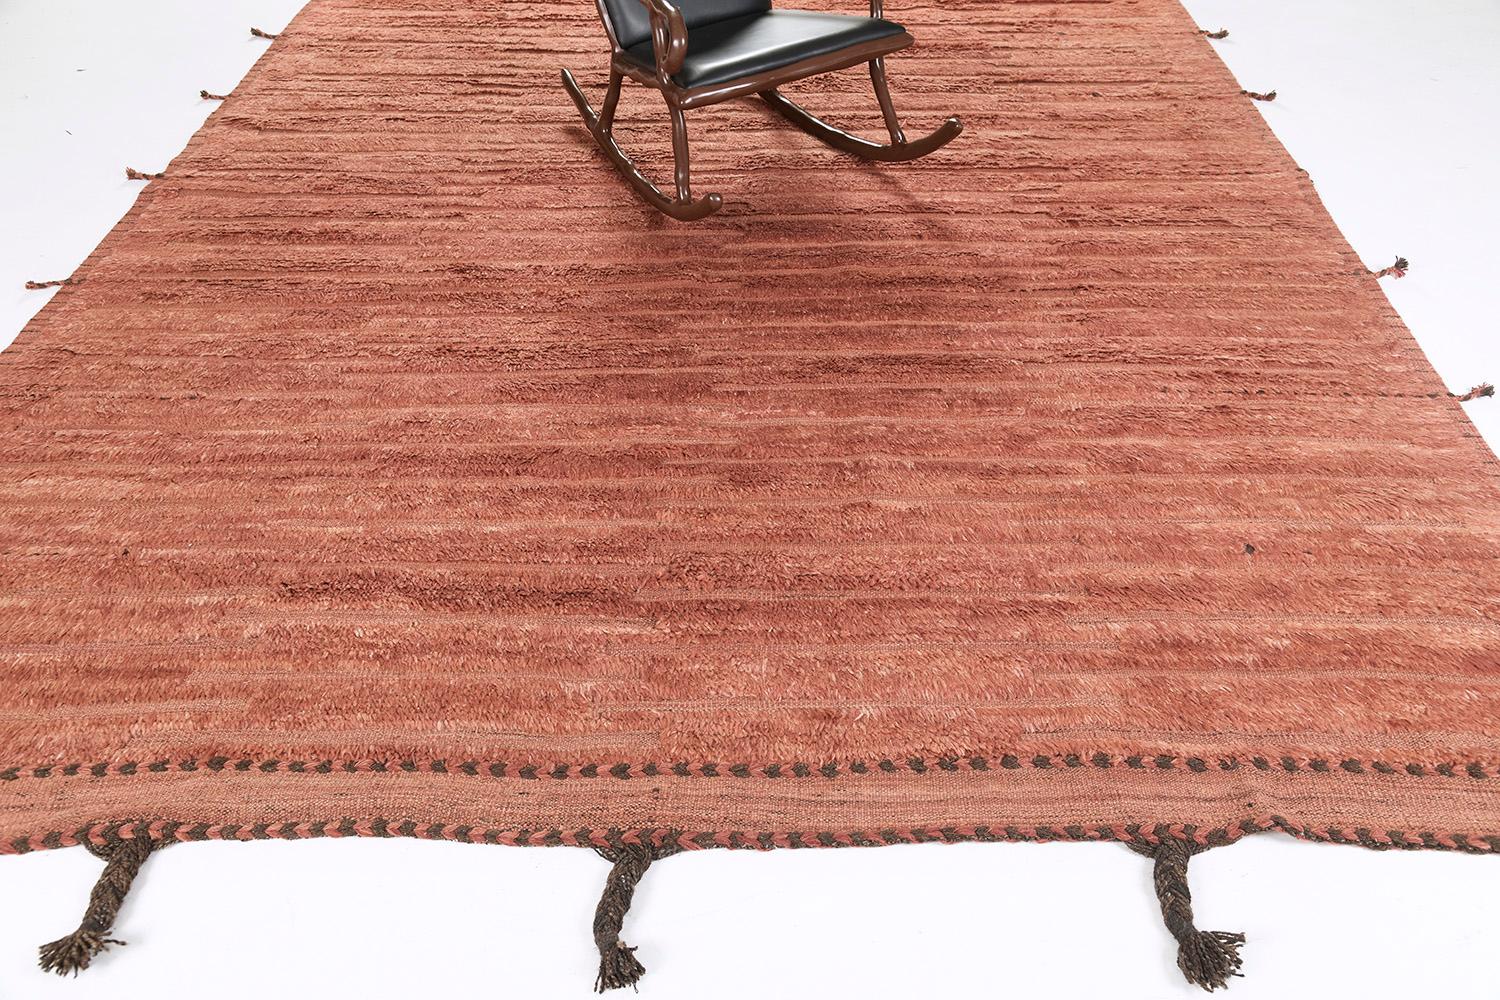 Beshabar is a gorgeous home decor that features a blushing tone that can complement other furniture. Through its simplicity and stunning embossed details, it plays an integral part in adorning the rug's overall elegant appearance. The Haute Bohemian